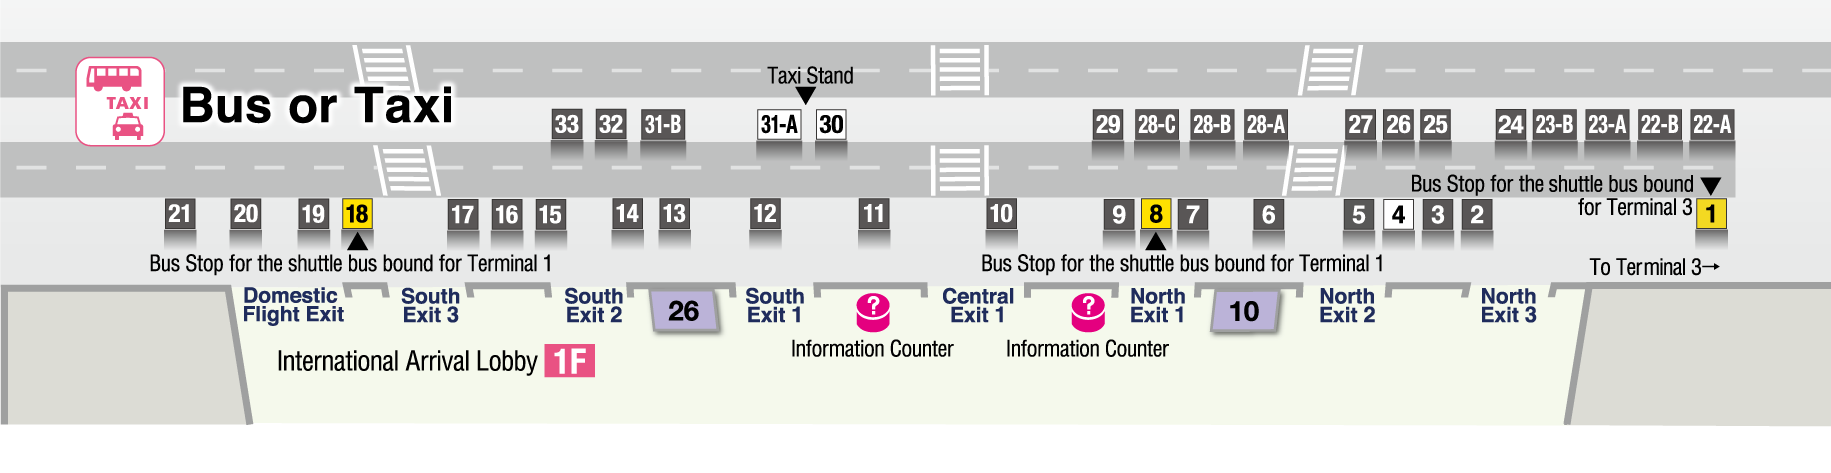 Guide to Terminal 2 Shuttle Bus Stops